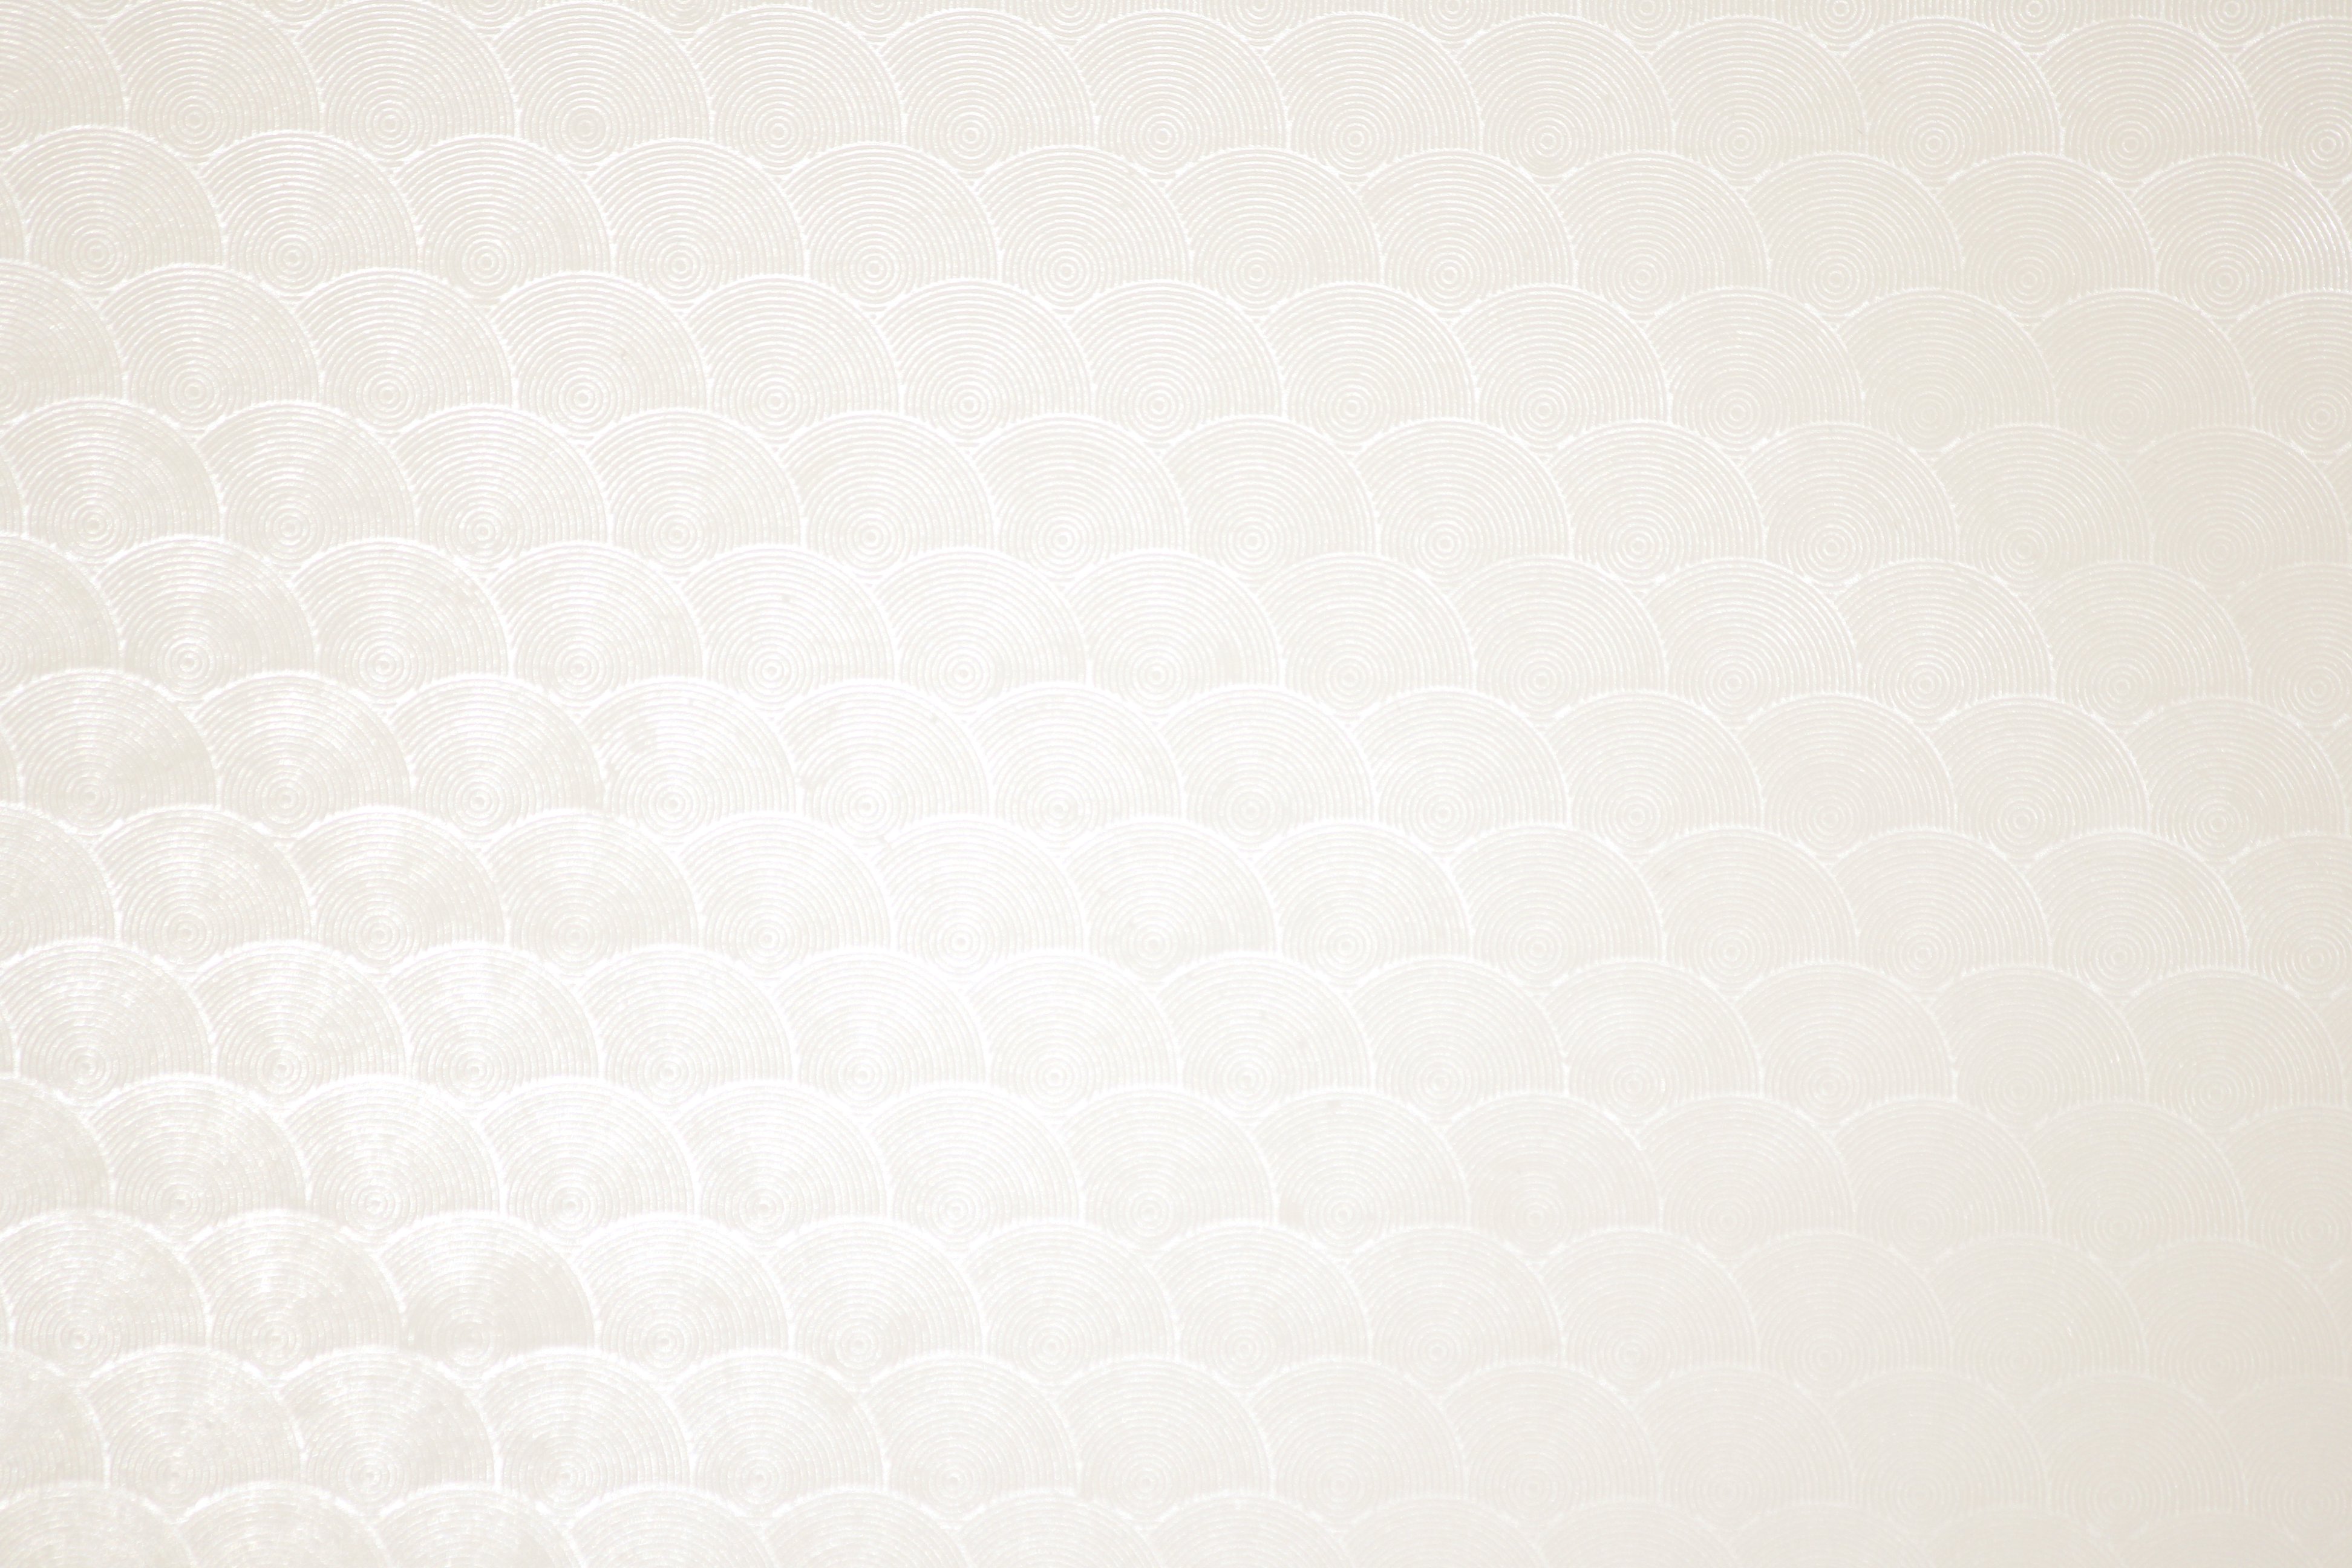 Ivory Or Off White Circle Patterned Plastic Texture